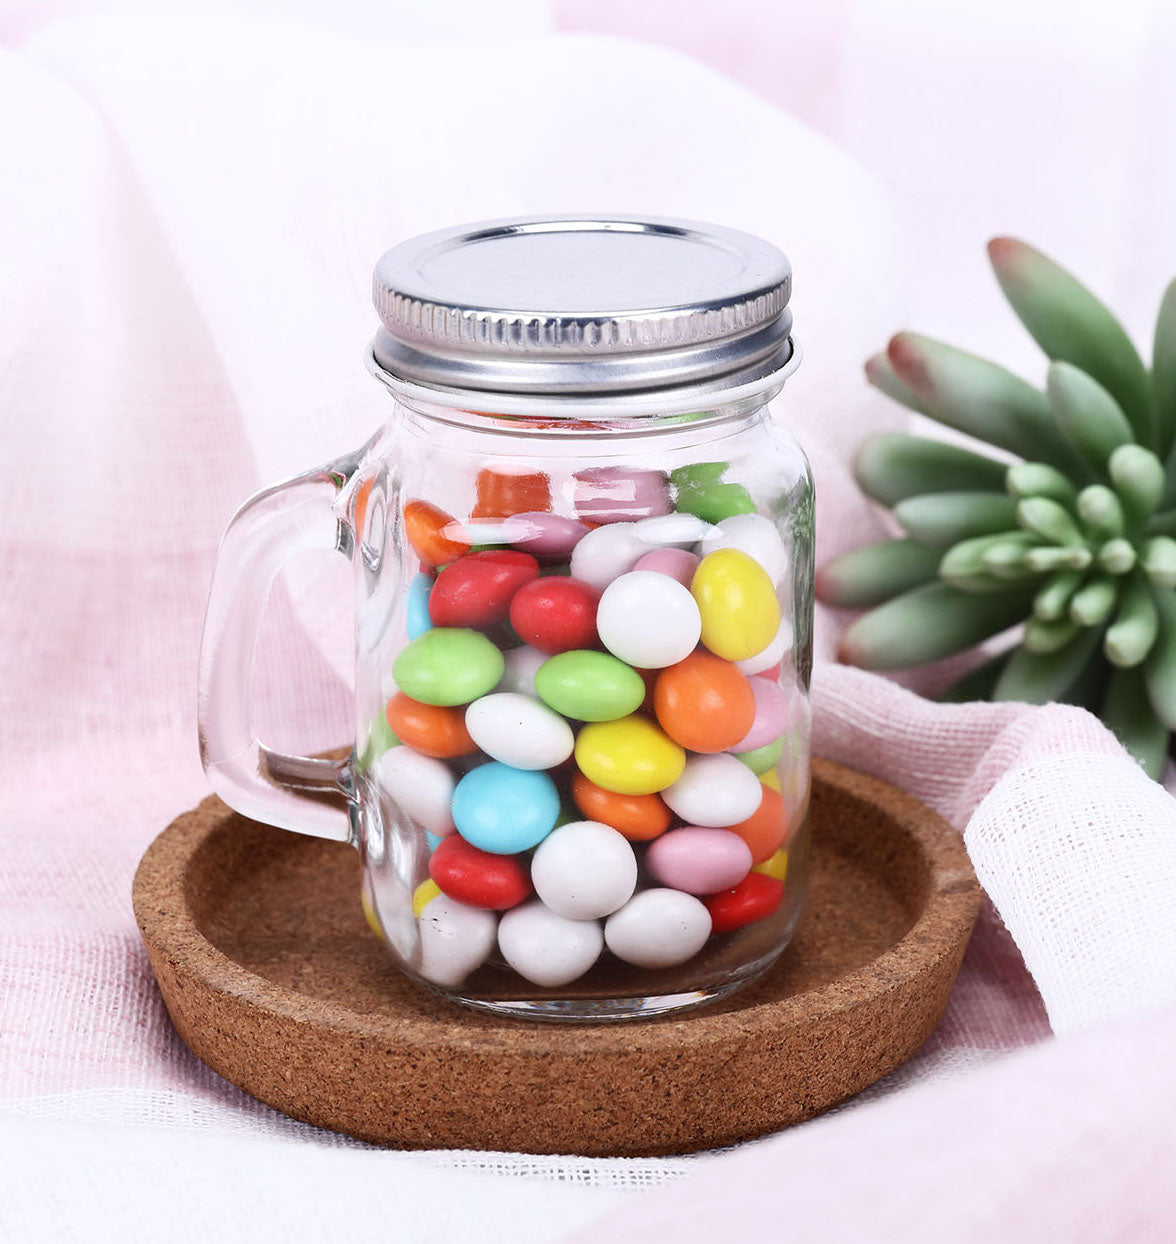 Efavormart 3 Pack | Clear Glass Apothecary Jars Candy Buffet Containers  with Lids For Wedding Party Favor Decor - 9/10/11